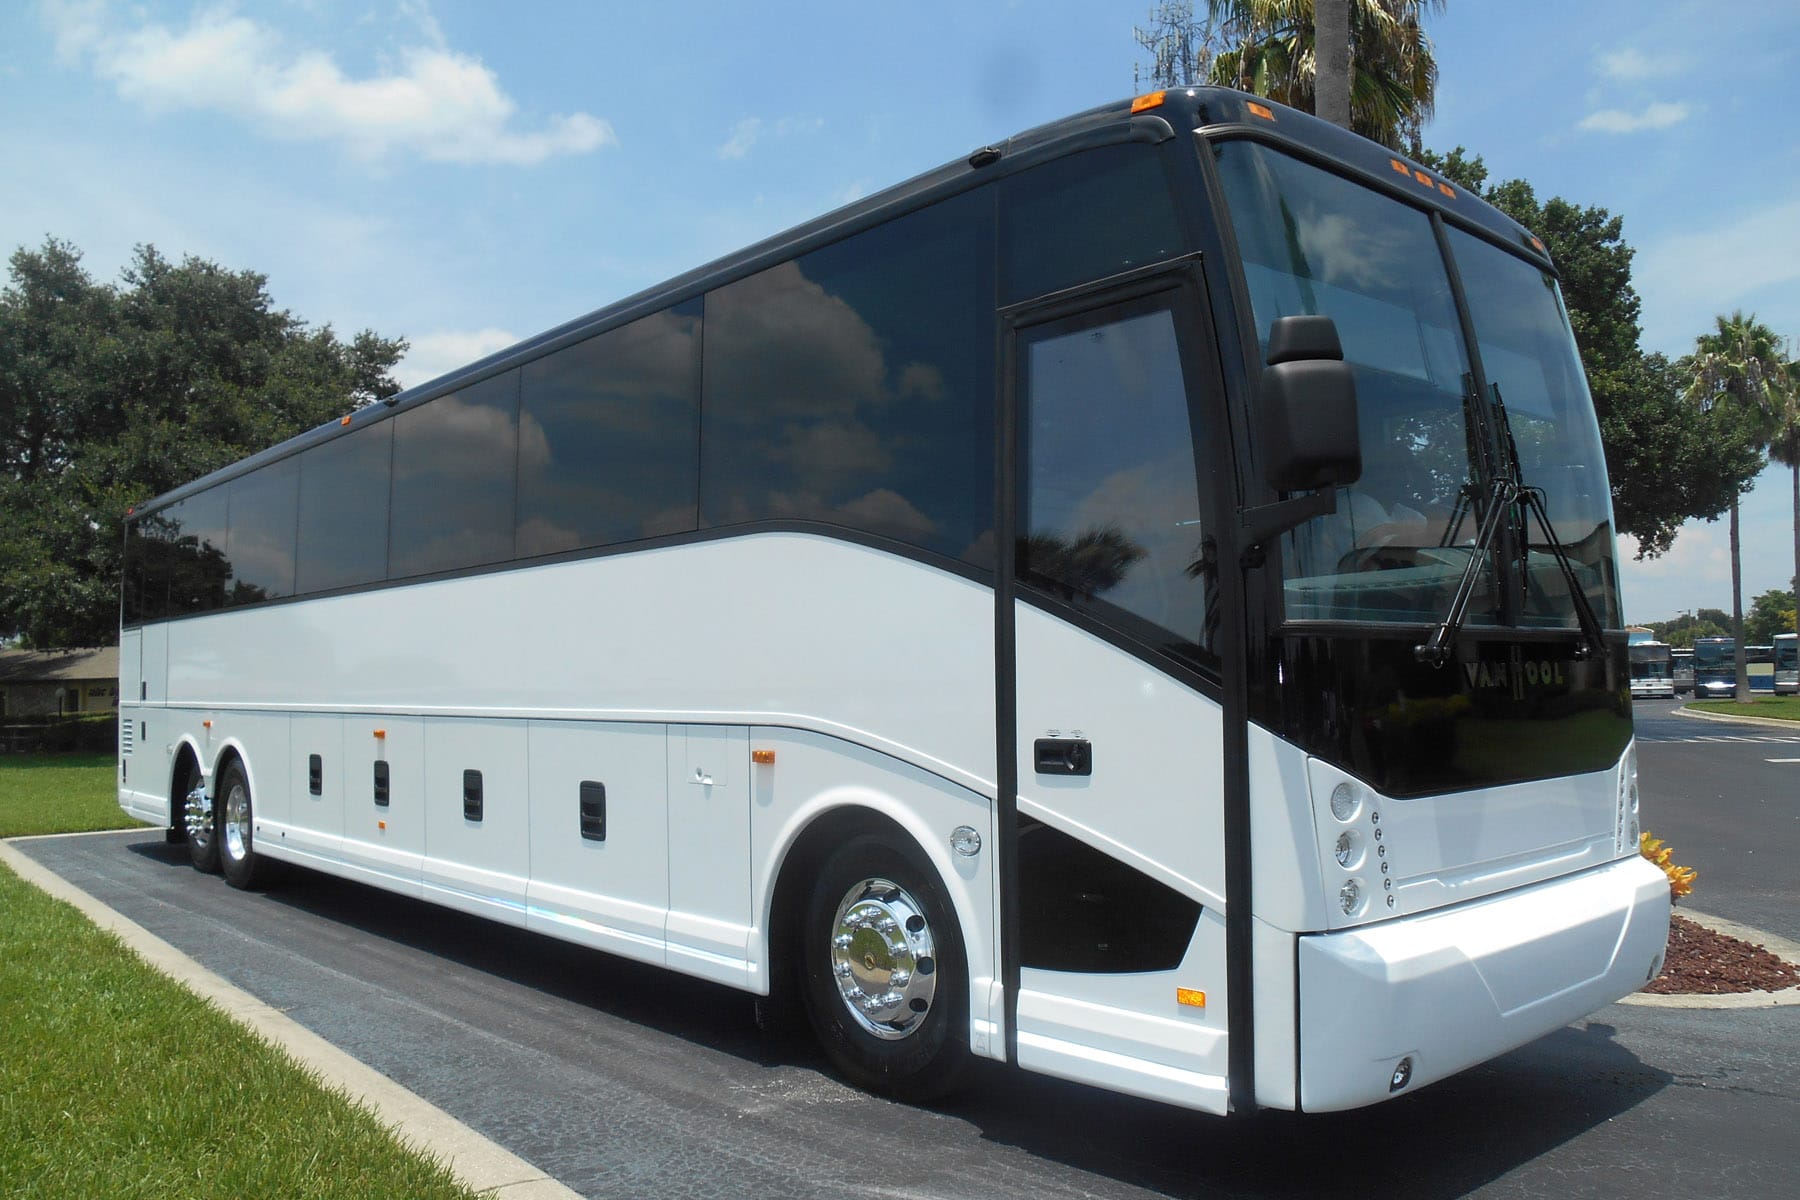 Luxury Coach
Coach Bus /
Riverside, CA

 / Hourly (Other services) $125.00
 / Hourly (City Tour) $125.00
 / Hourly (Sporting Event) $125.00
 / Hourly (Wedding) $125.00
 / Airport Transfer $475.00
